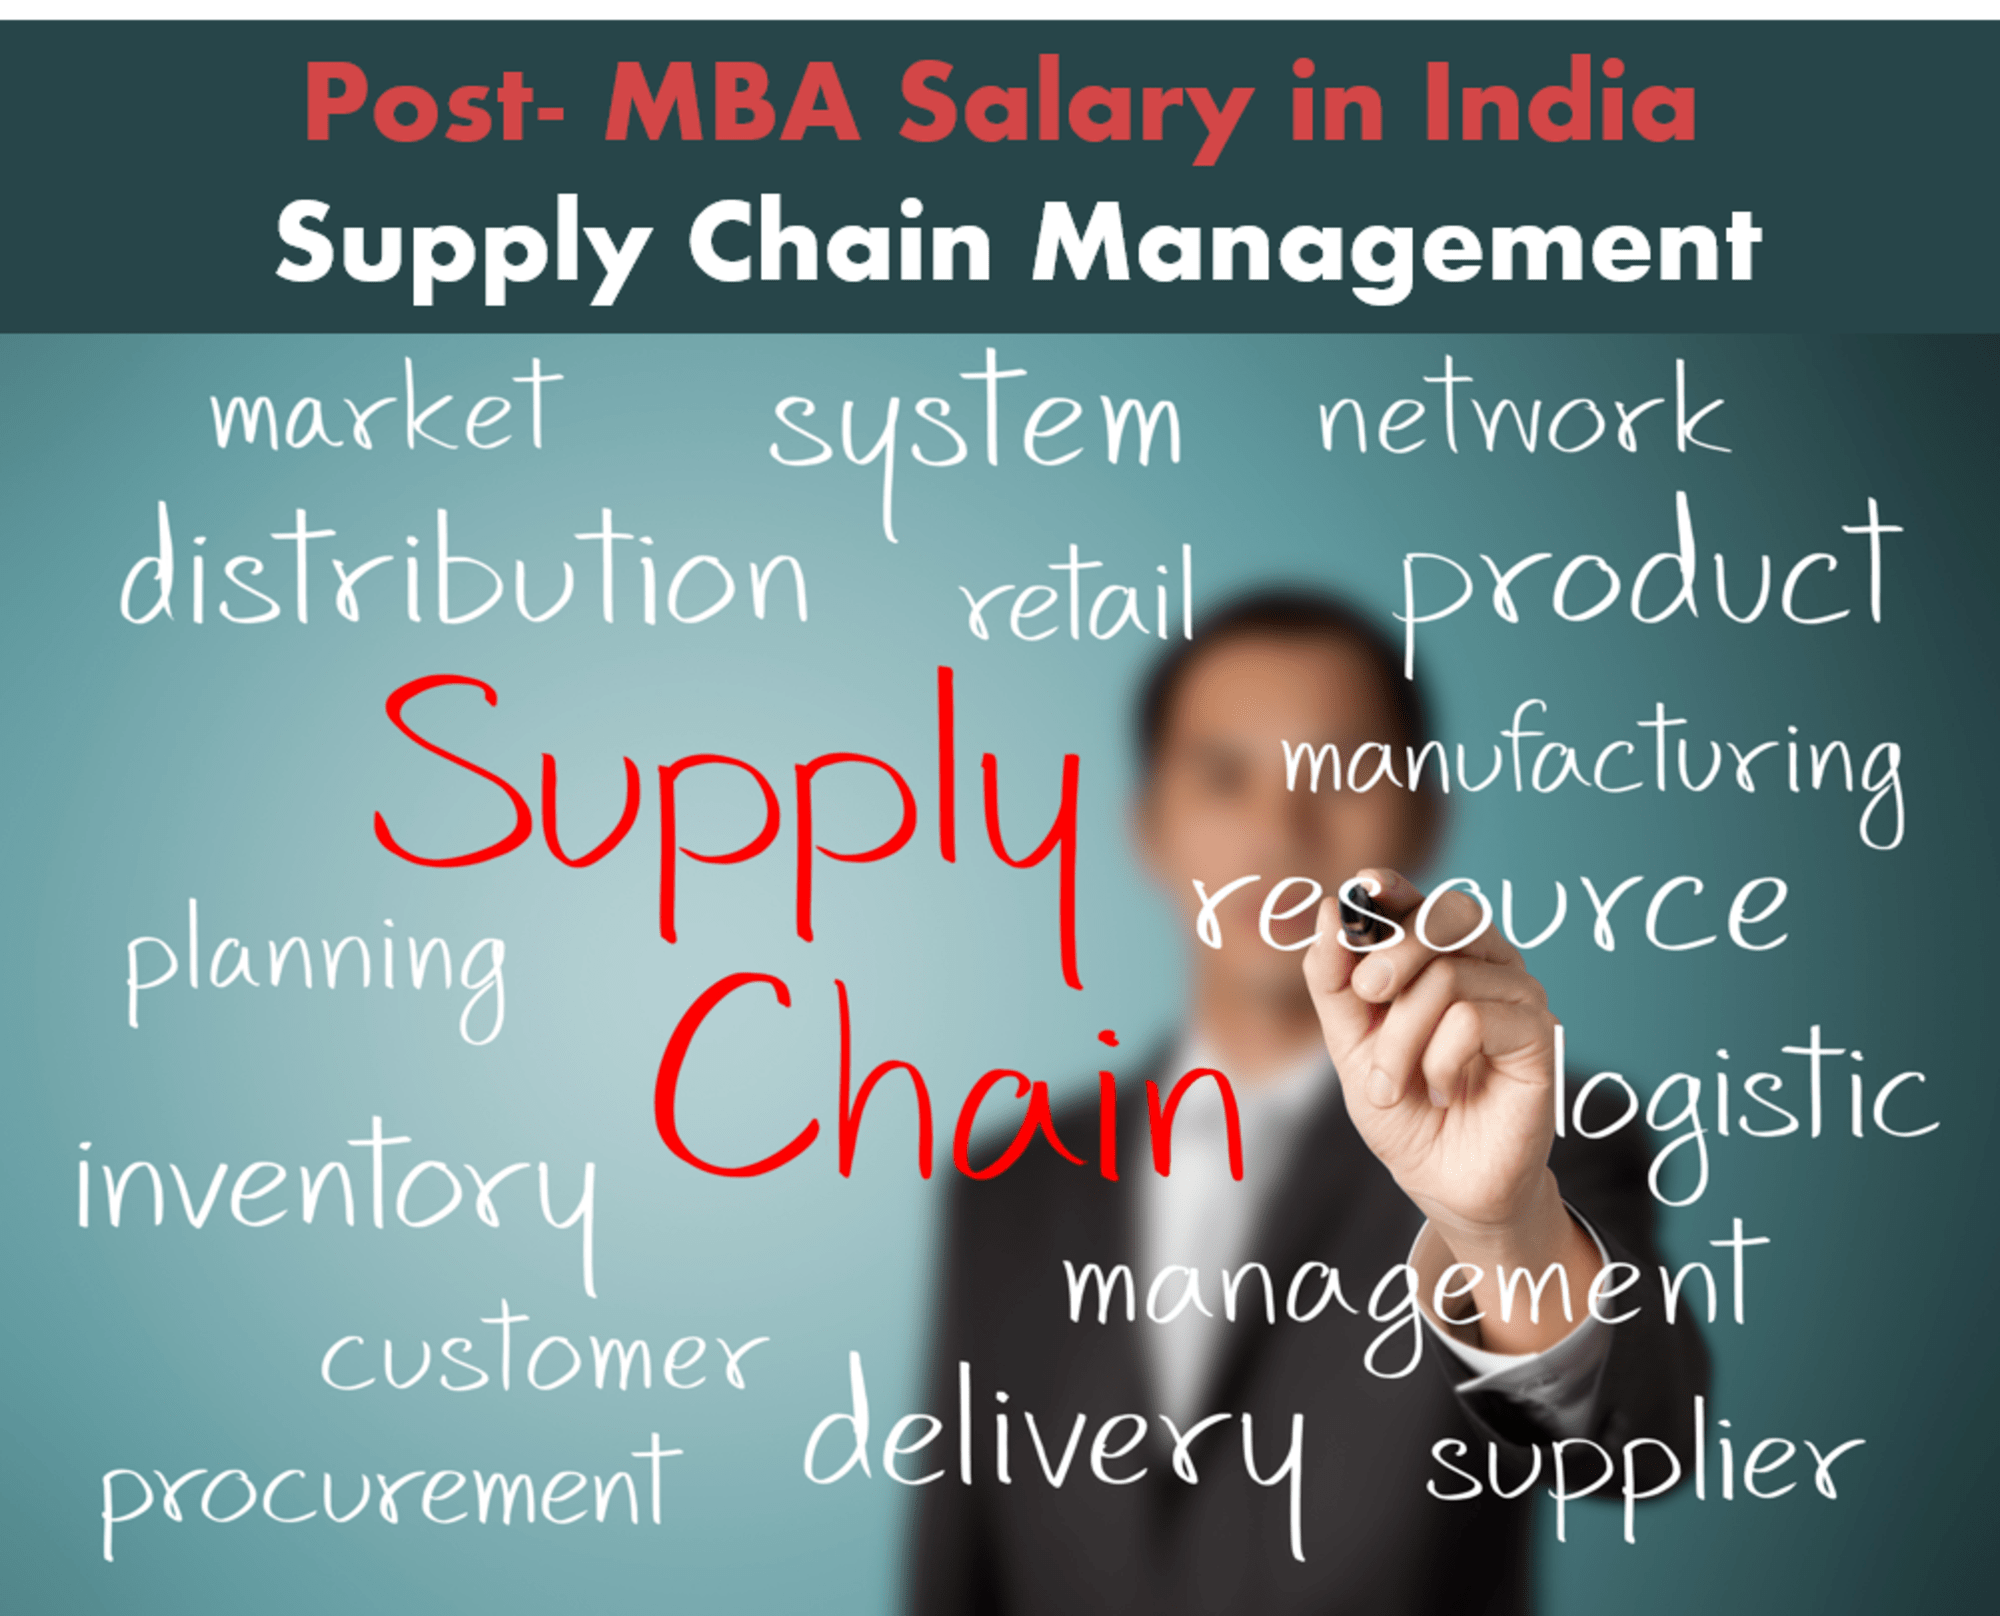 Management topics. Supply Chain Sustainability. Story Chain on jobs.